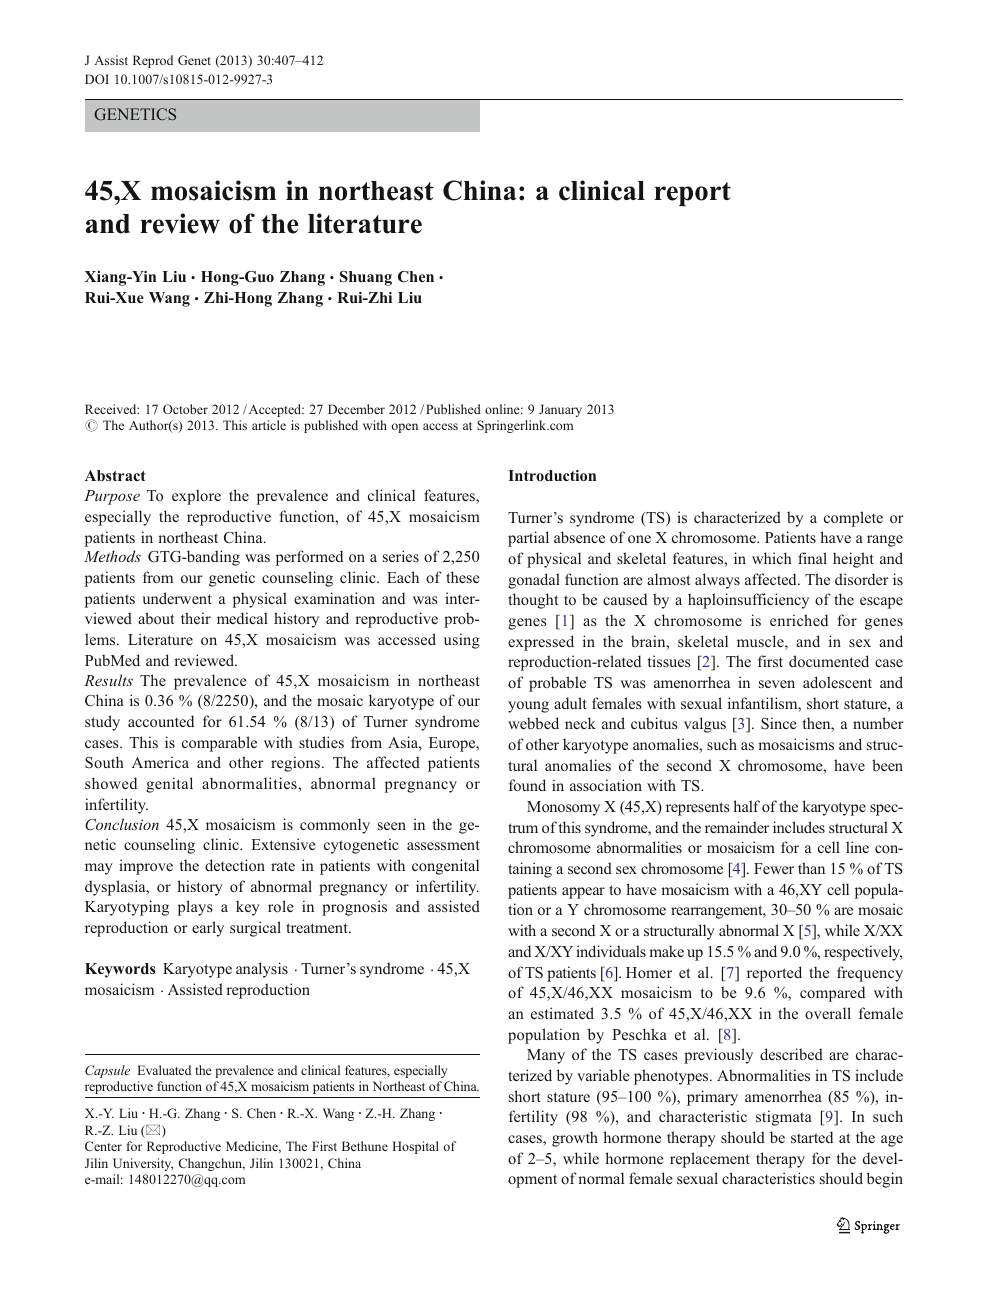 45 X Mosaicism In Northeast China A Clinical Report And Review Of The Literature Topic Of Research Paper In Clinical Medicine Download Scholarly Article Pdf And Read For Free On Cyberleninka Open